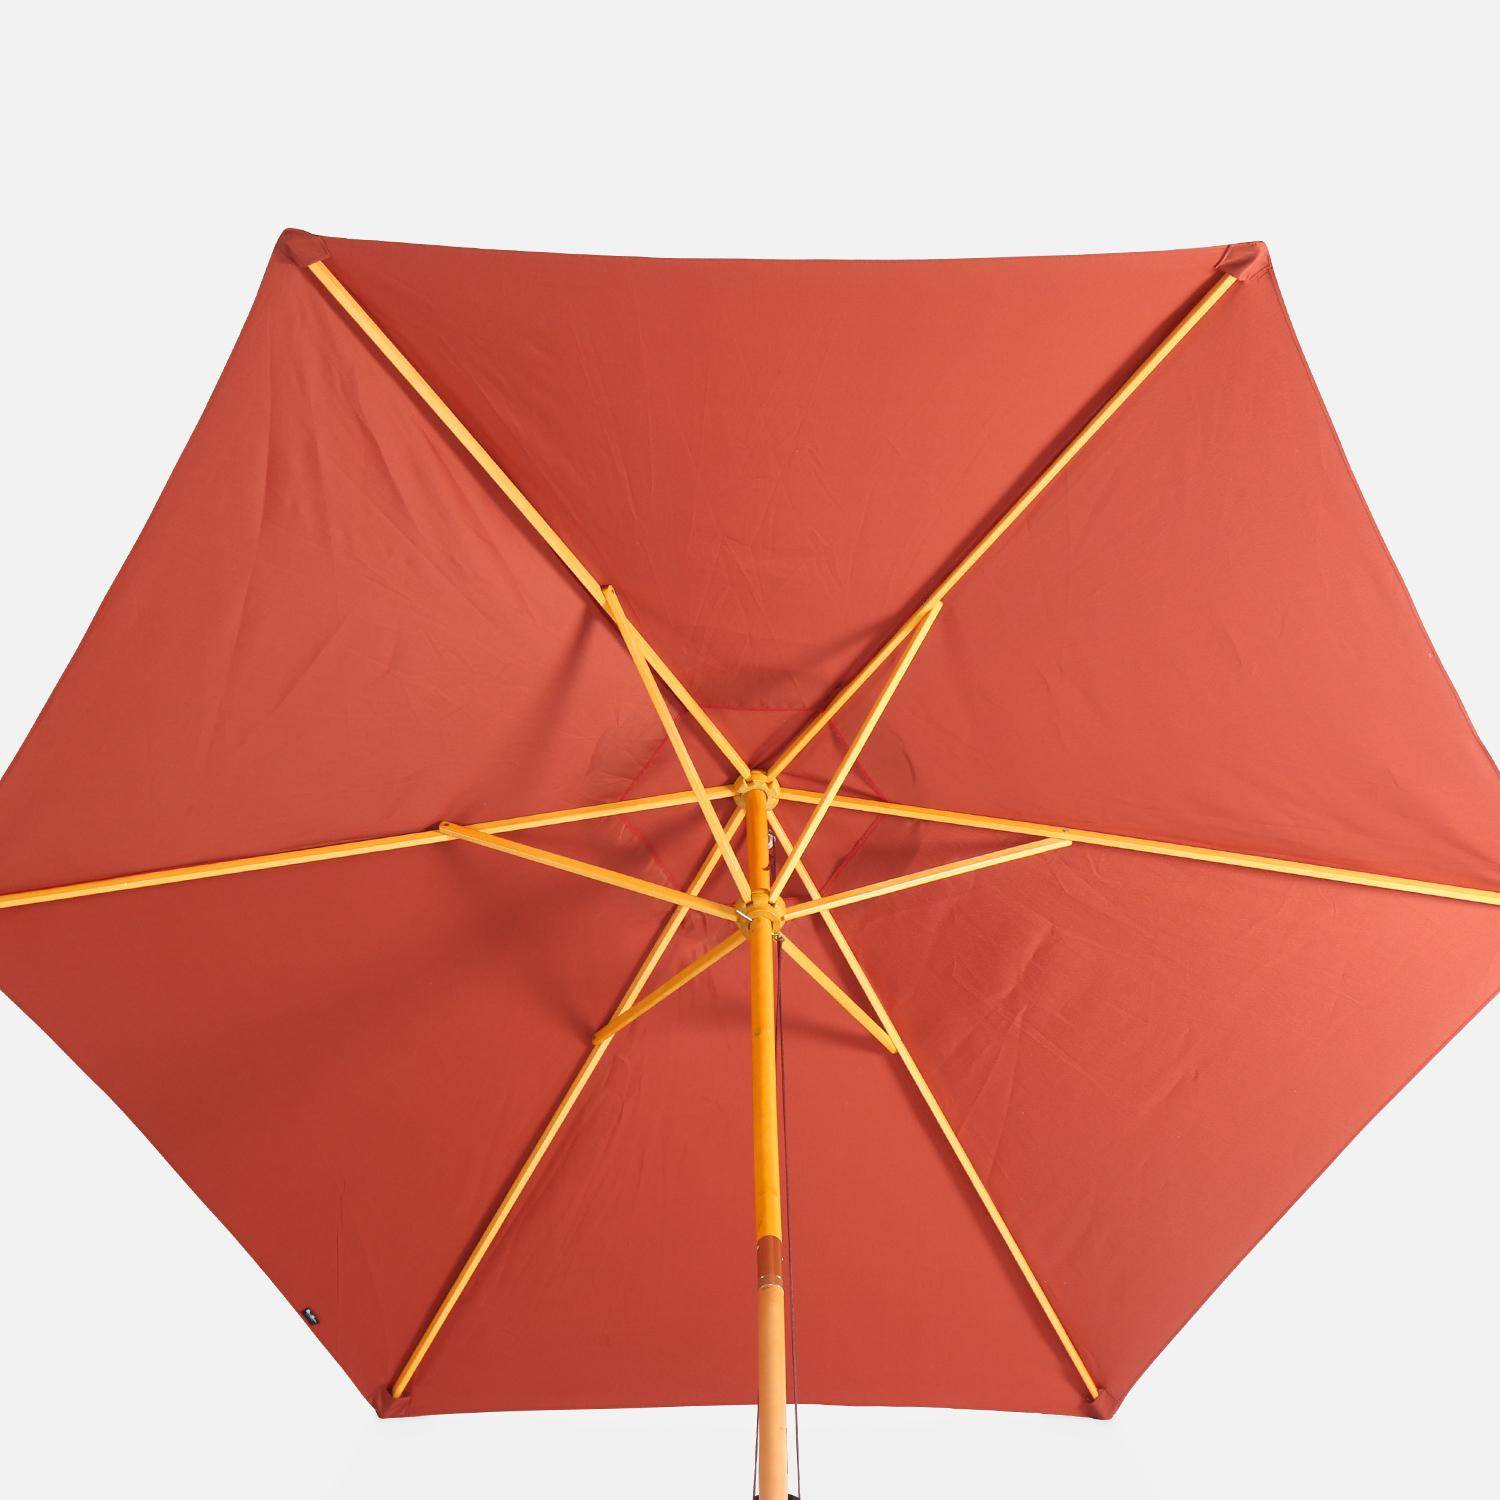 Round wooden parasol Ø300cm with straight pole -  adjustable aluminium central mast in wood and crank handle opening - Cabourg - Terracotta Photo3